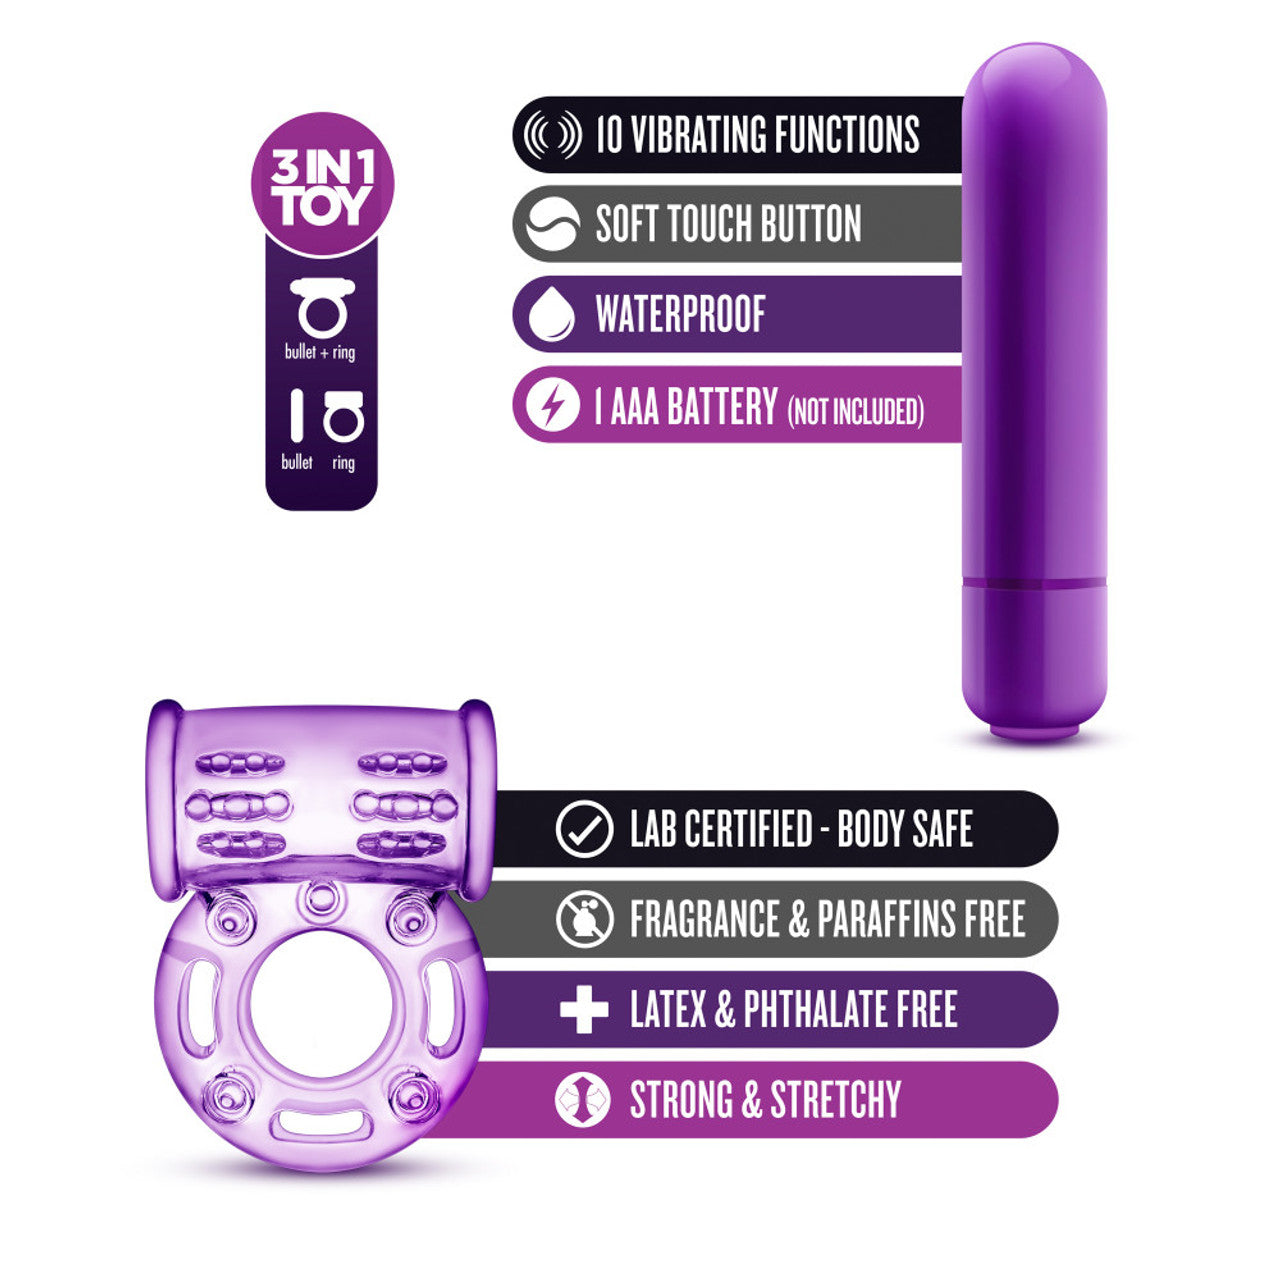 Couples Play Vibrating Cock Ring - Purple - Thorn & Feather Sex Toy Canada